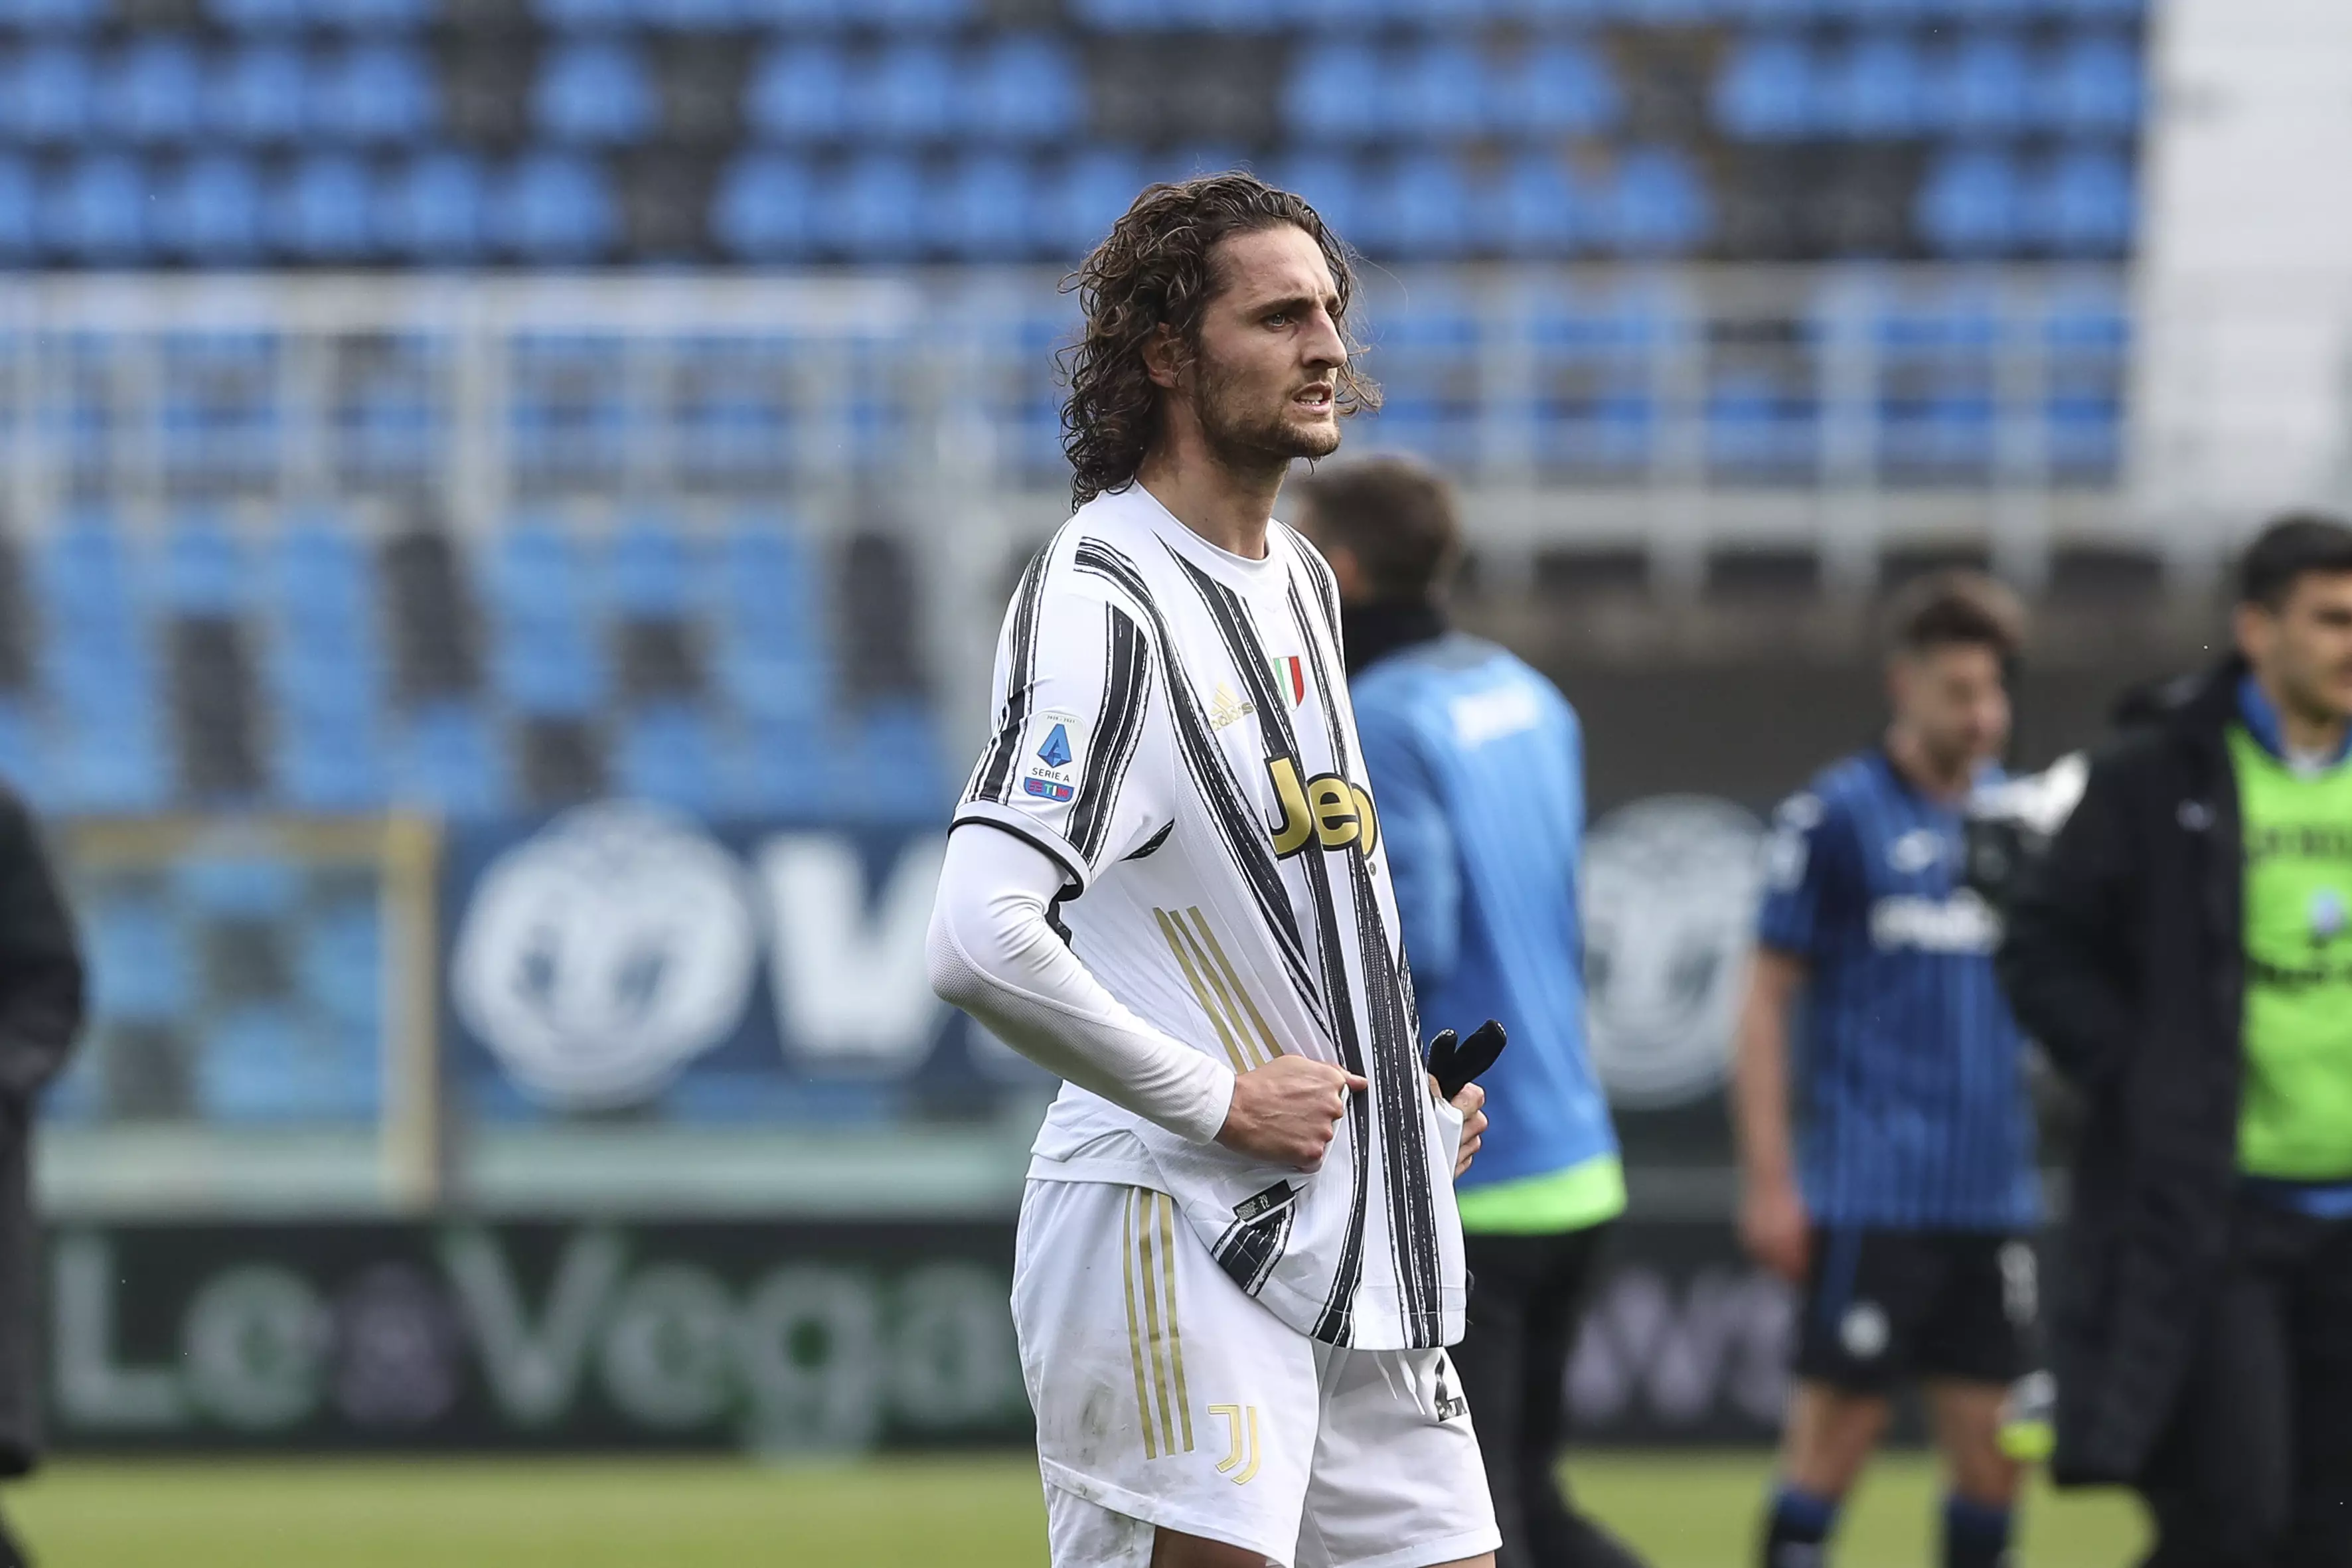 Rabiot has been linked with United before. Image: PA Images